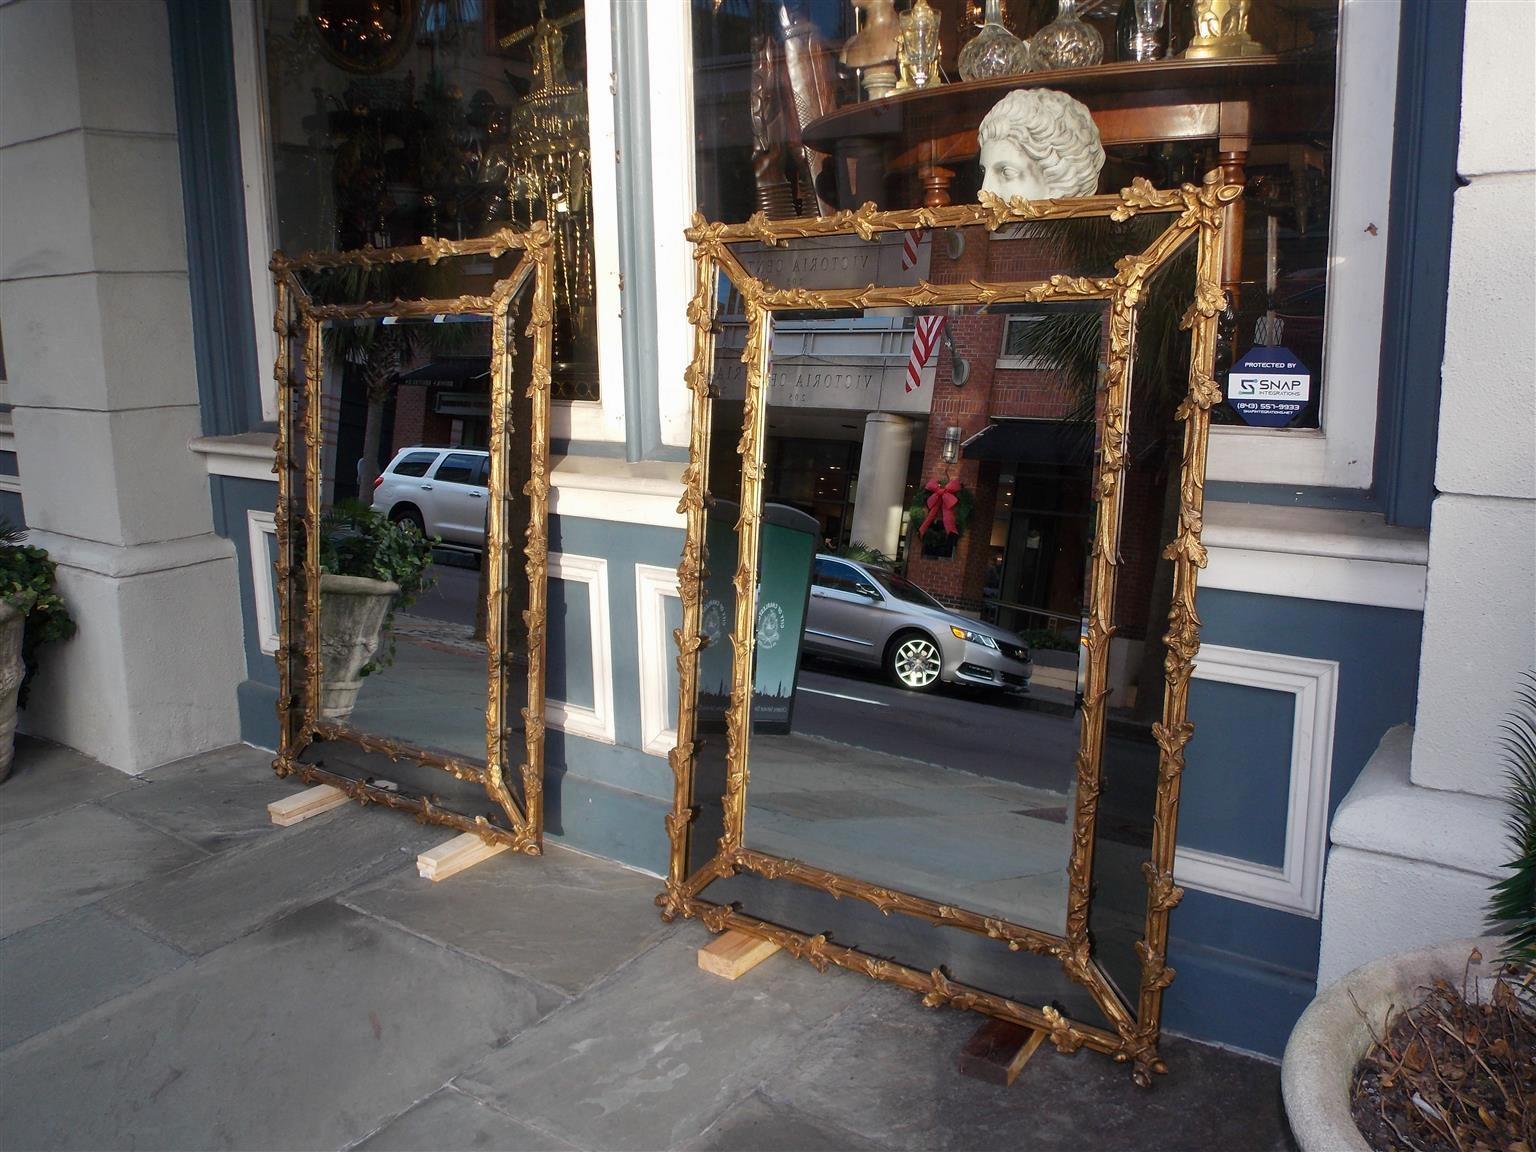 Pair of French gilt carved wood foliage and acorn motif wall mirrors. Mirrors retain the original beveled glass and wood backs covered with paper, Mid-19th century.